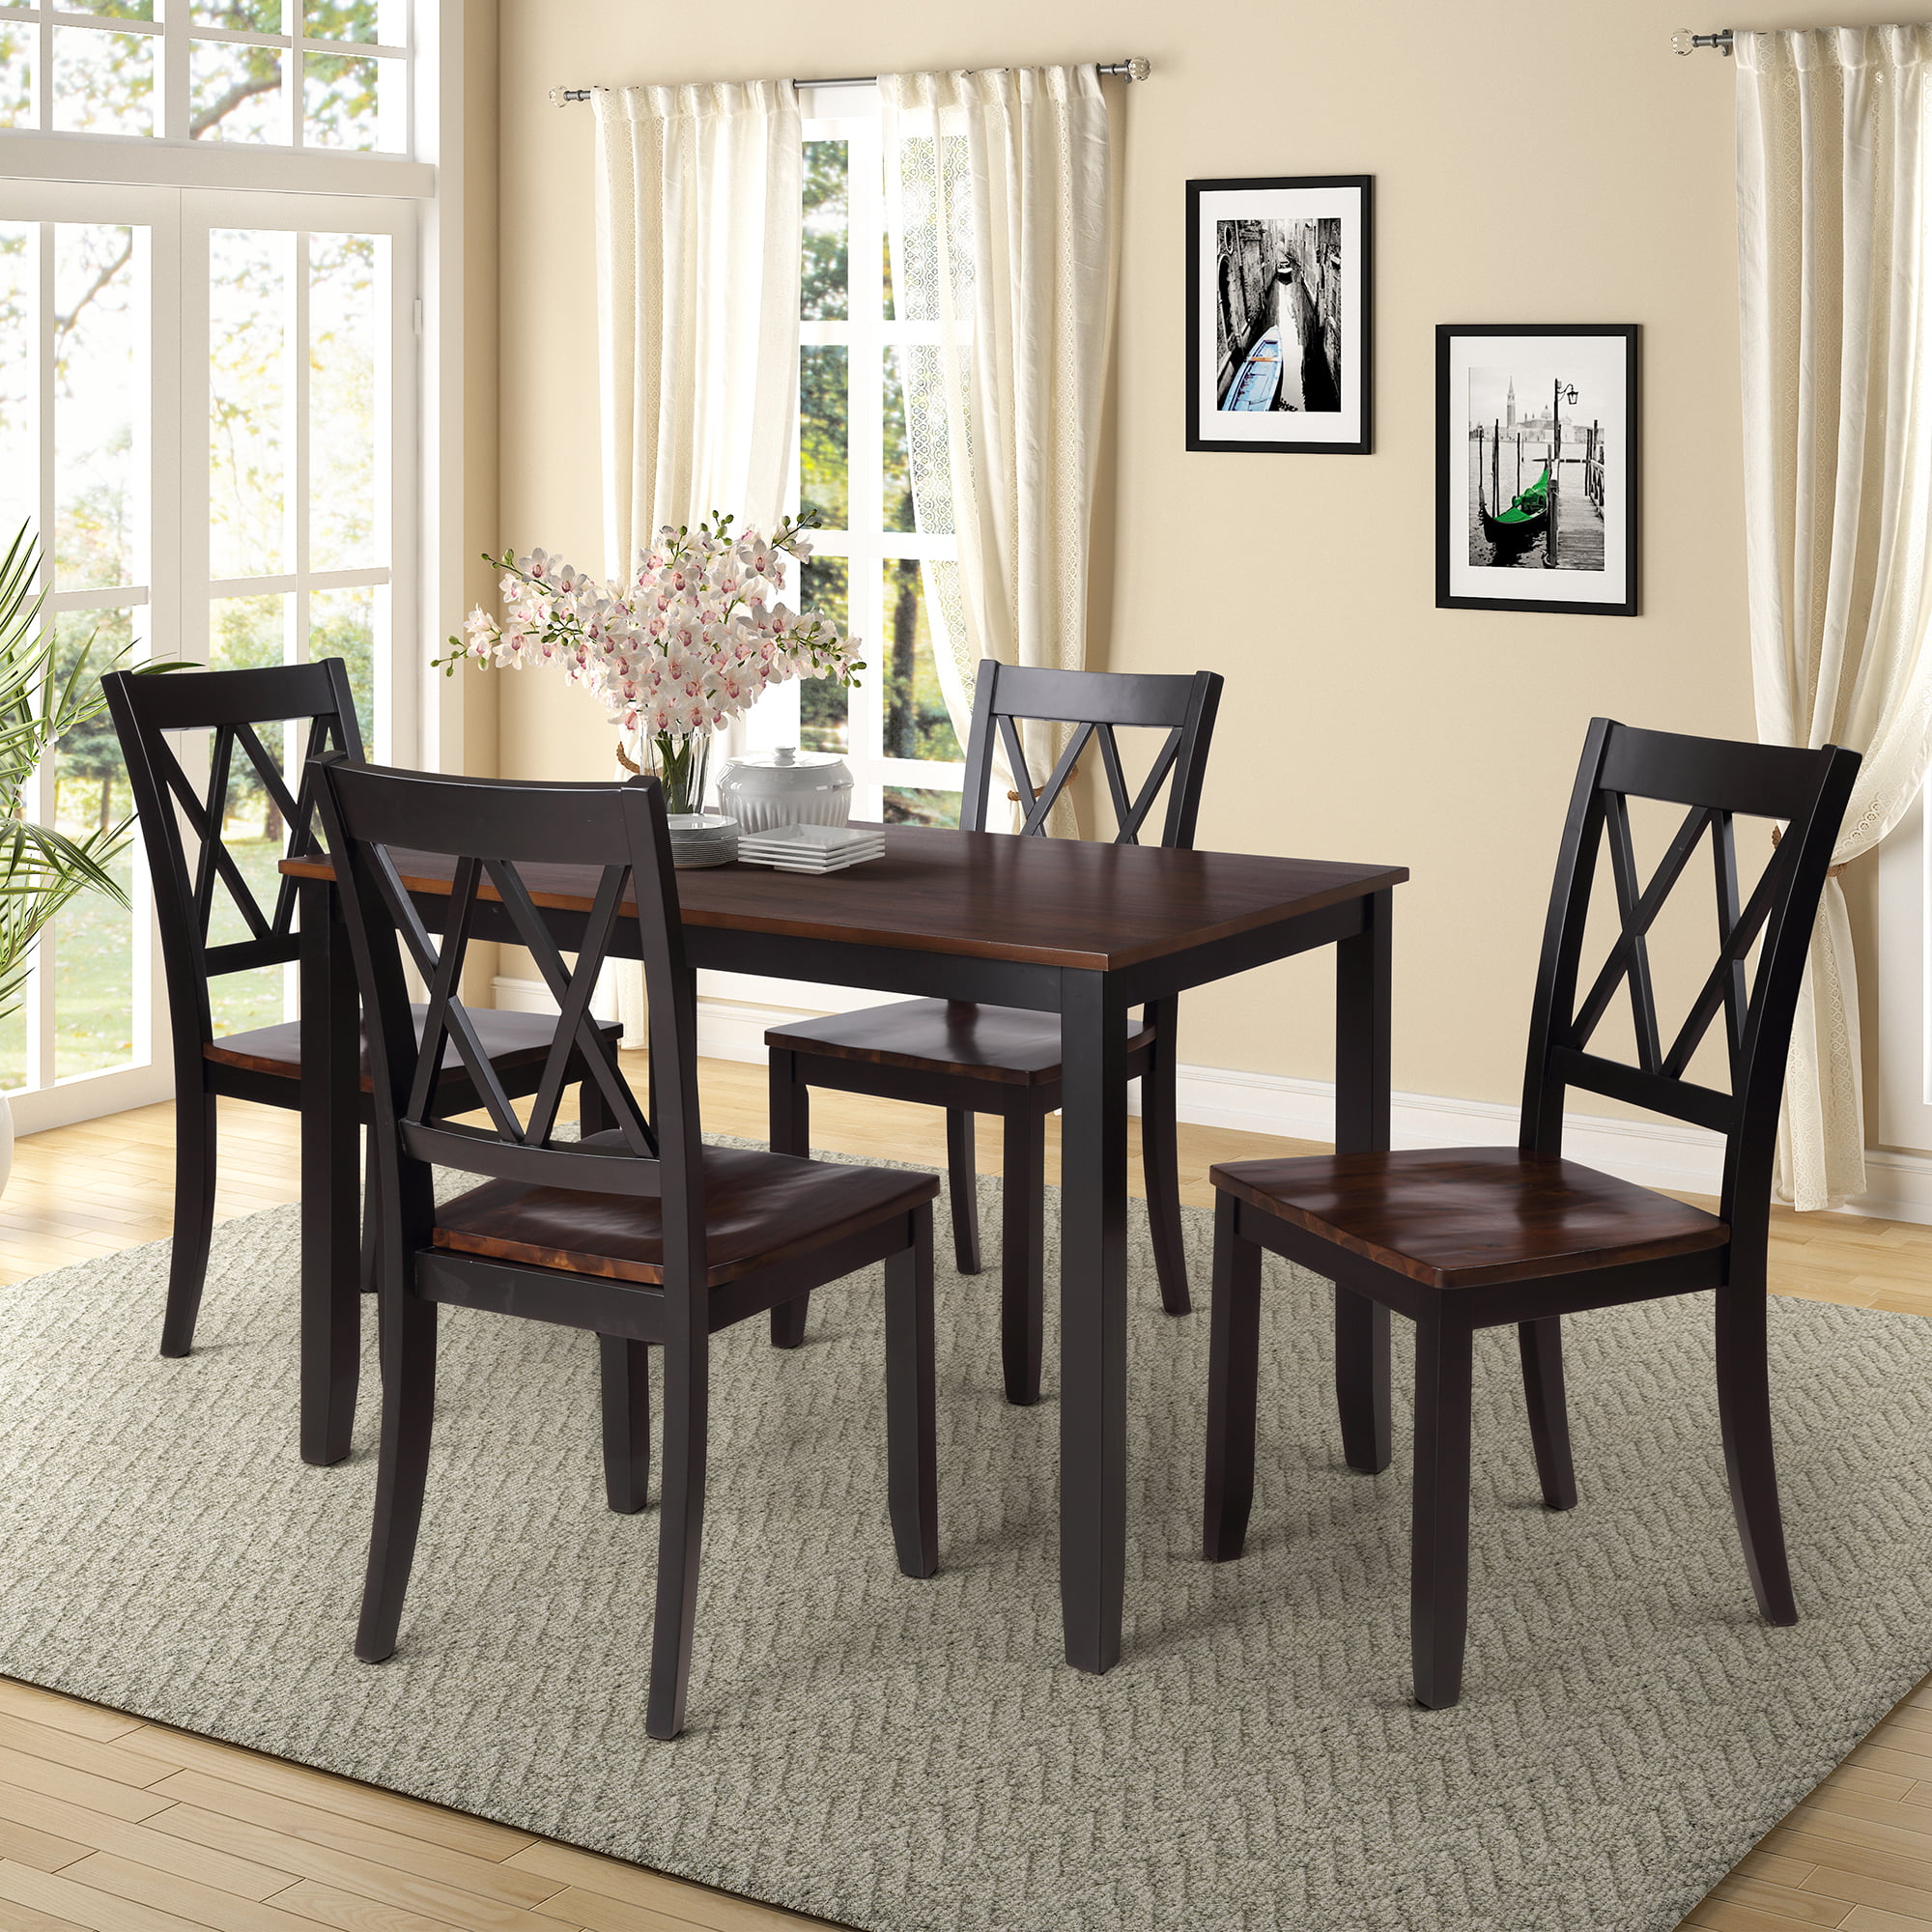  black wood kitchen table and chairs